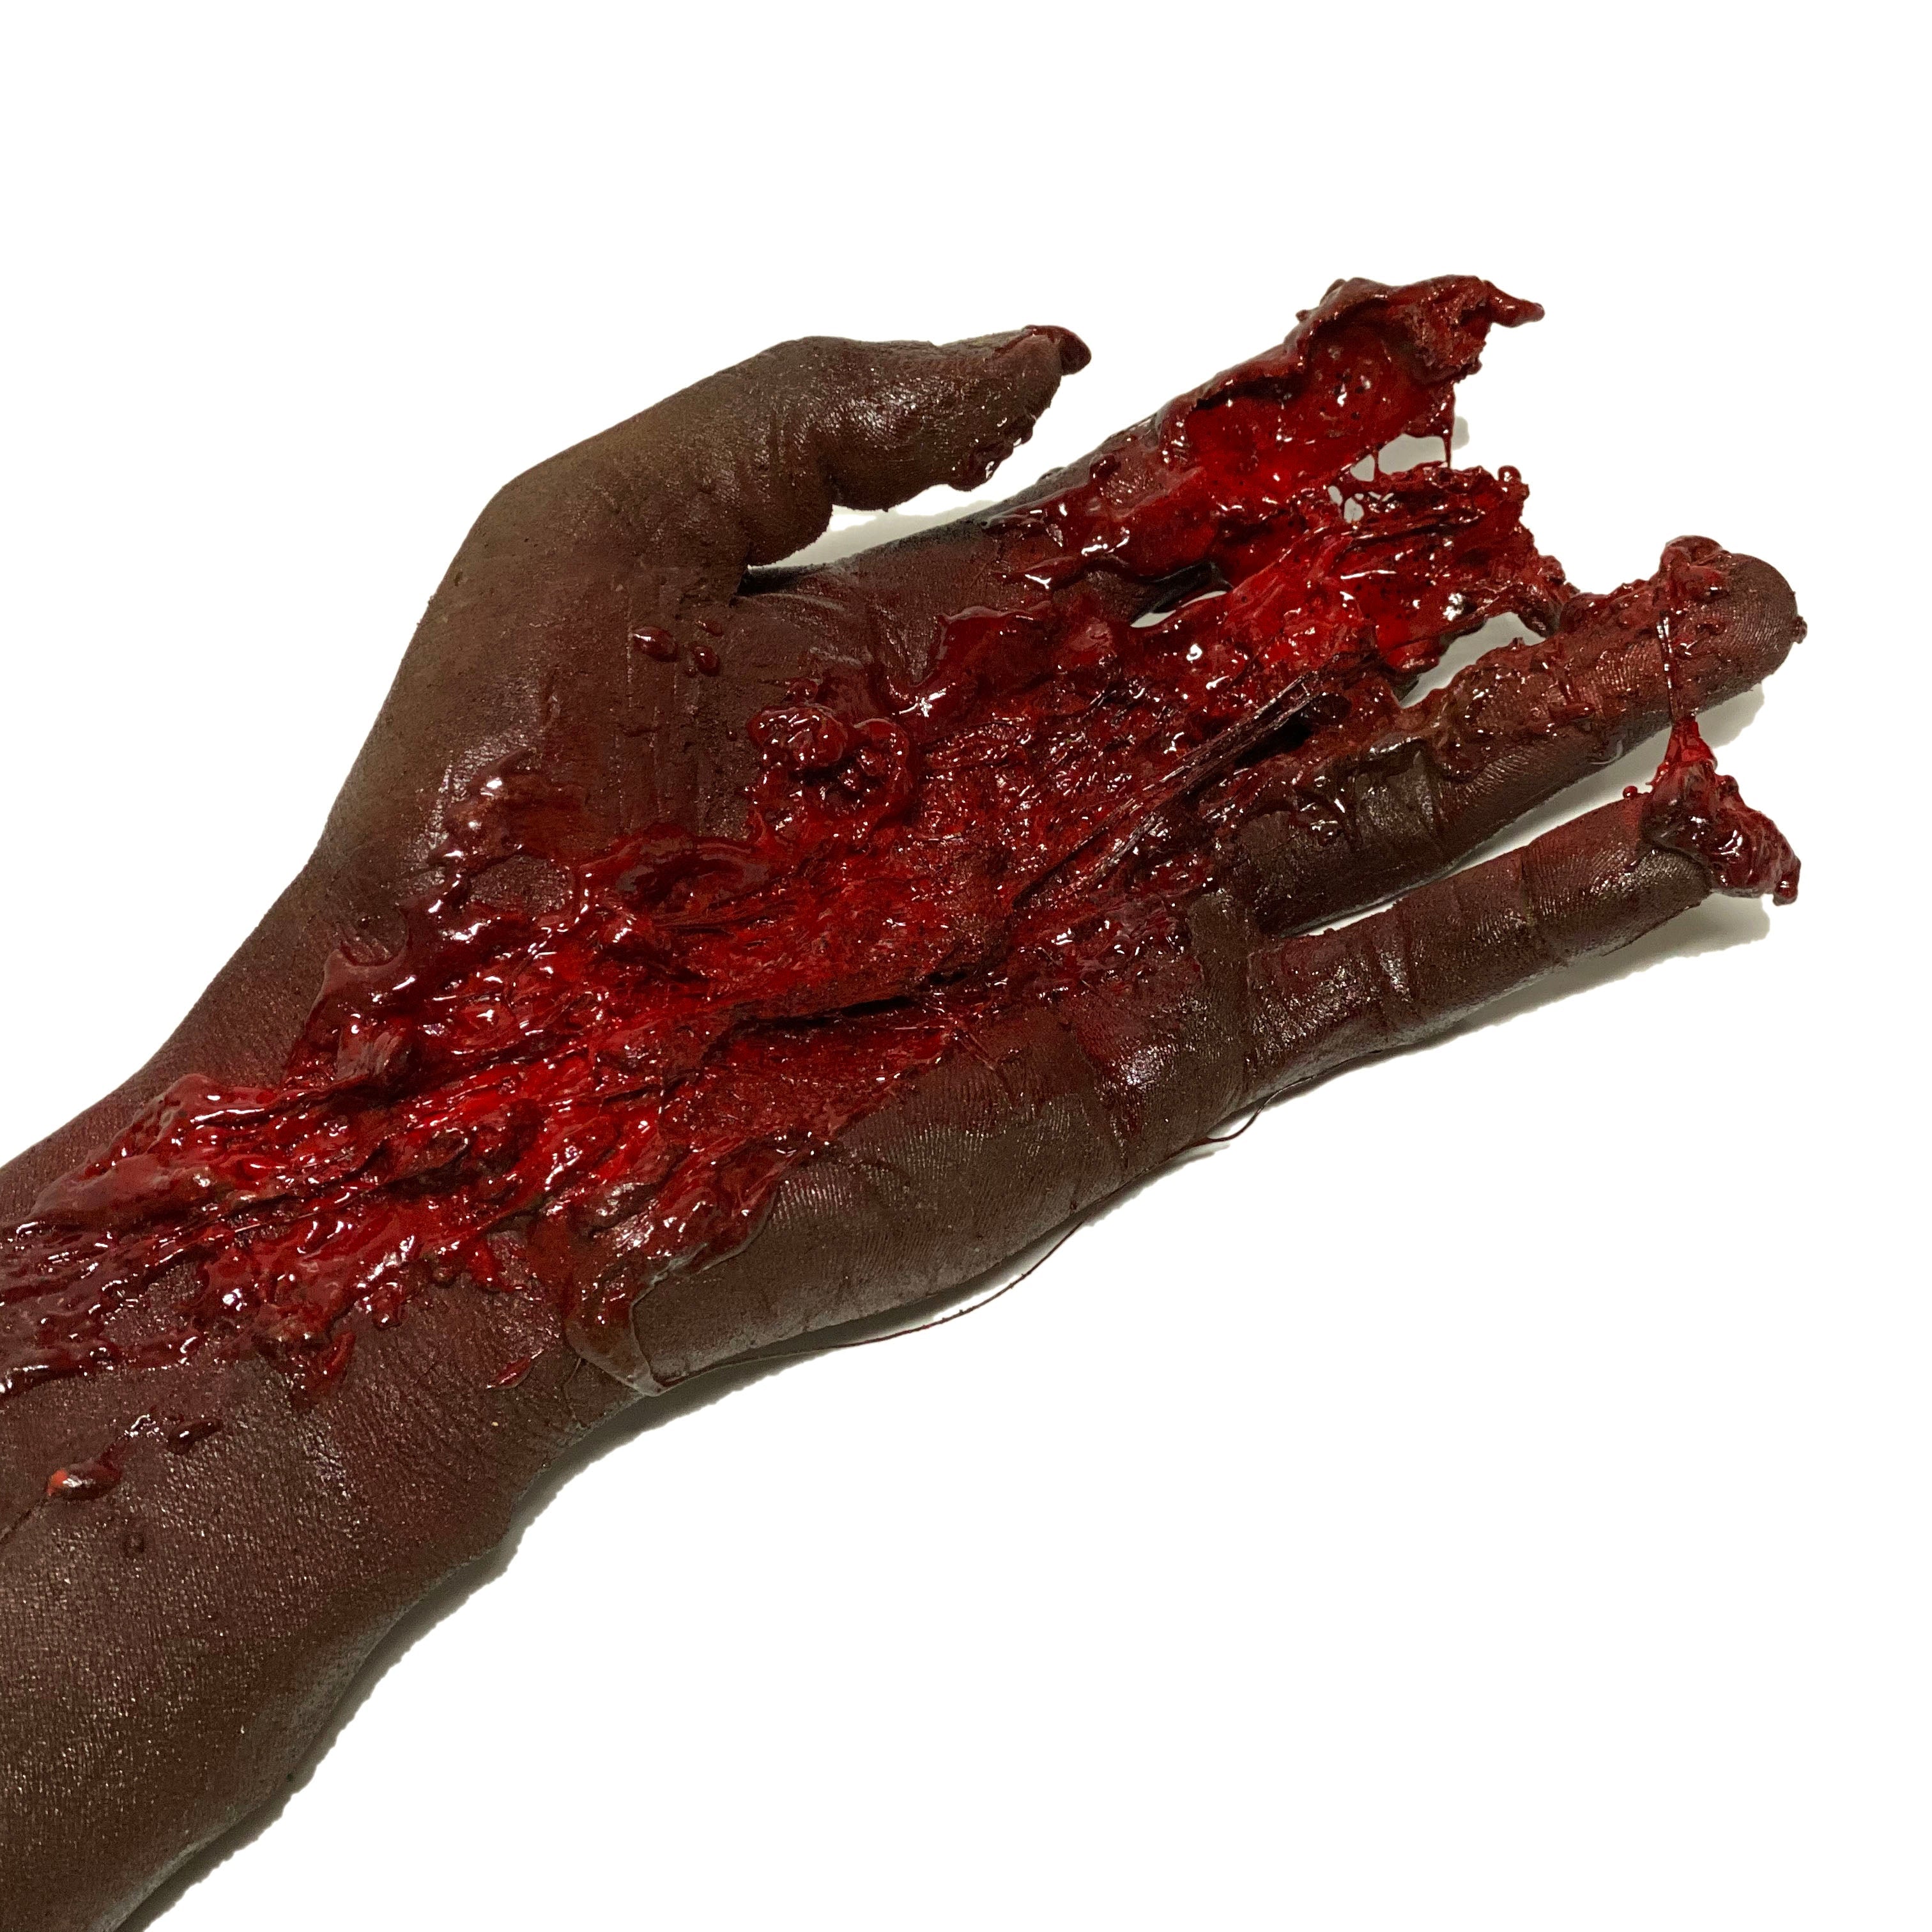 Bloody Freshly Severed Arm - Rubber with Realistic Gore Effects - Dark